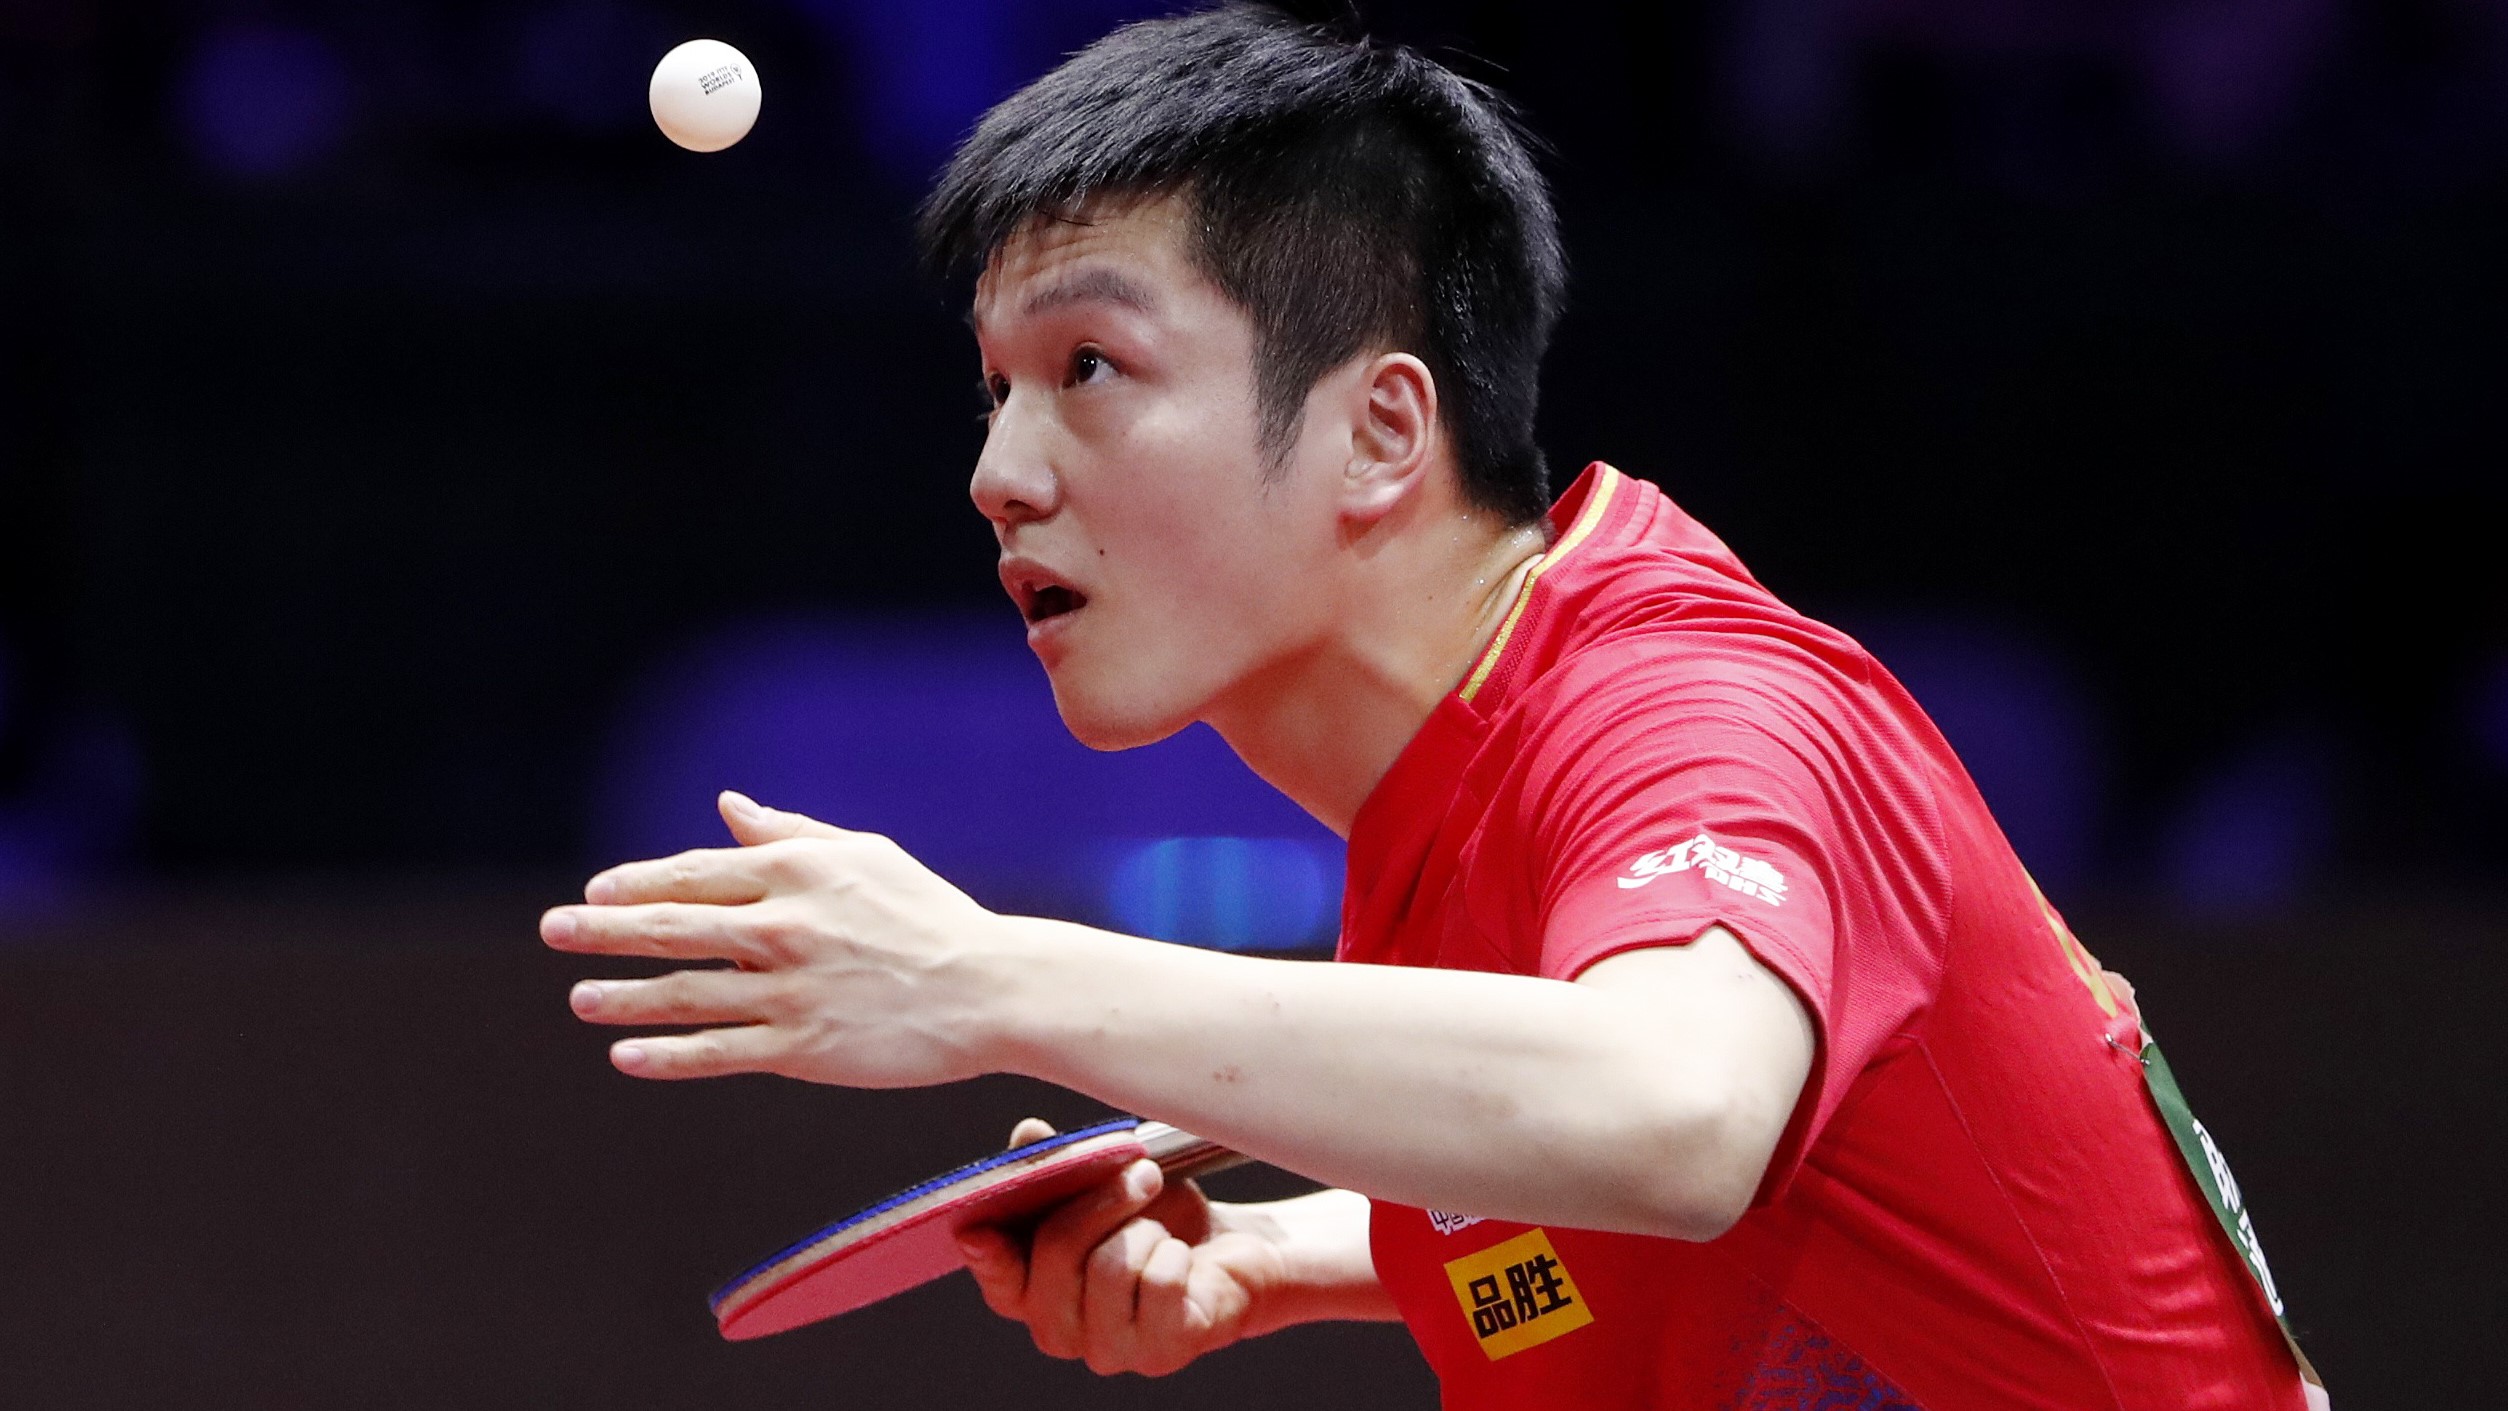 How to watch World Team Table Tennis Championships 2022 live stream online from anywhere